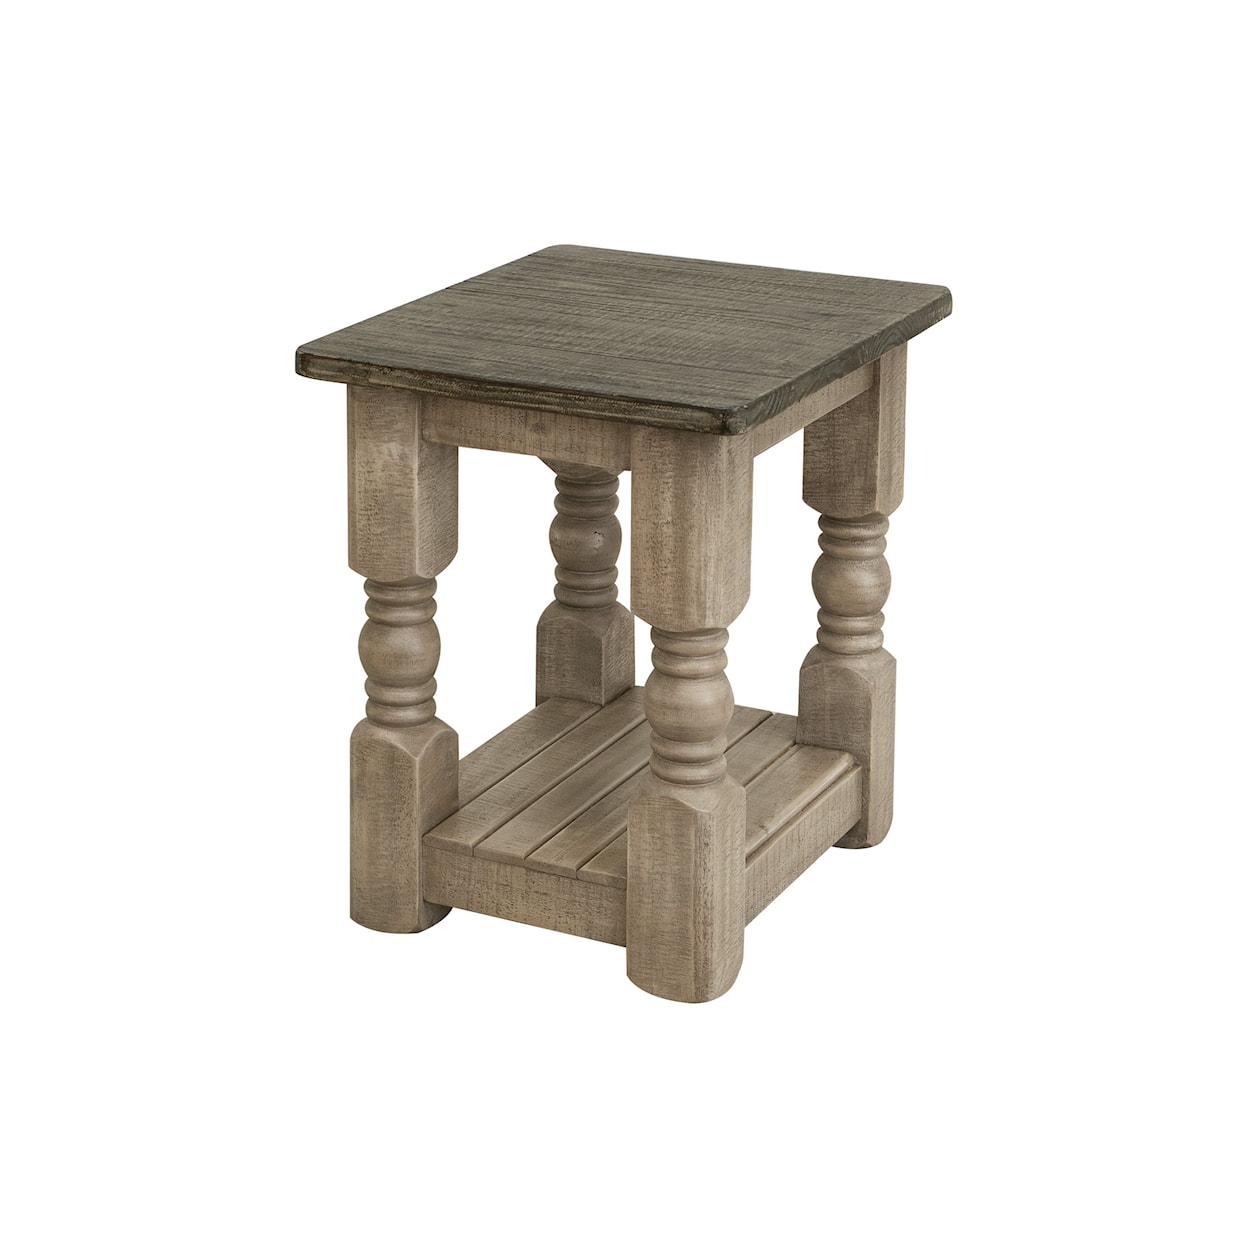 VFM Signature Natural Stone Chairside Table